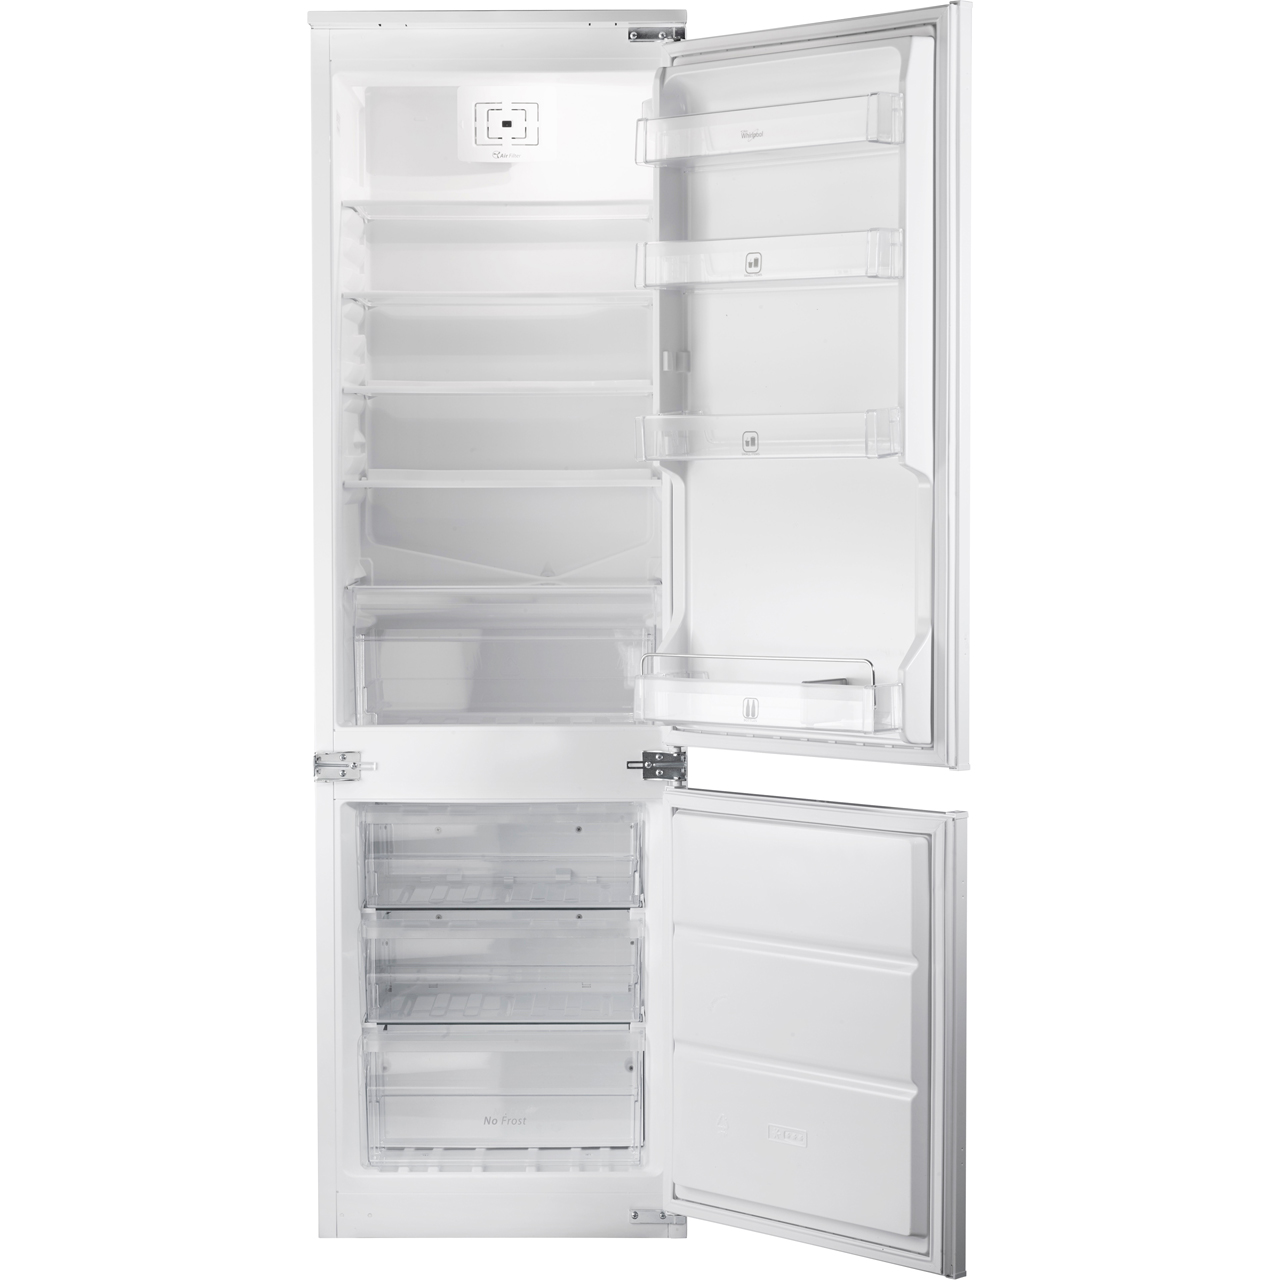 Whirlpool ART201/63A+/NF.1 Integrated 70/30 Frost Free Fridge Freezer with Sliding Door Fixing Kit Review